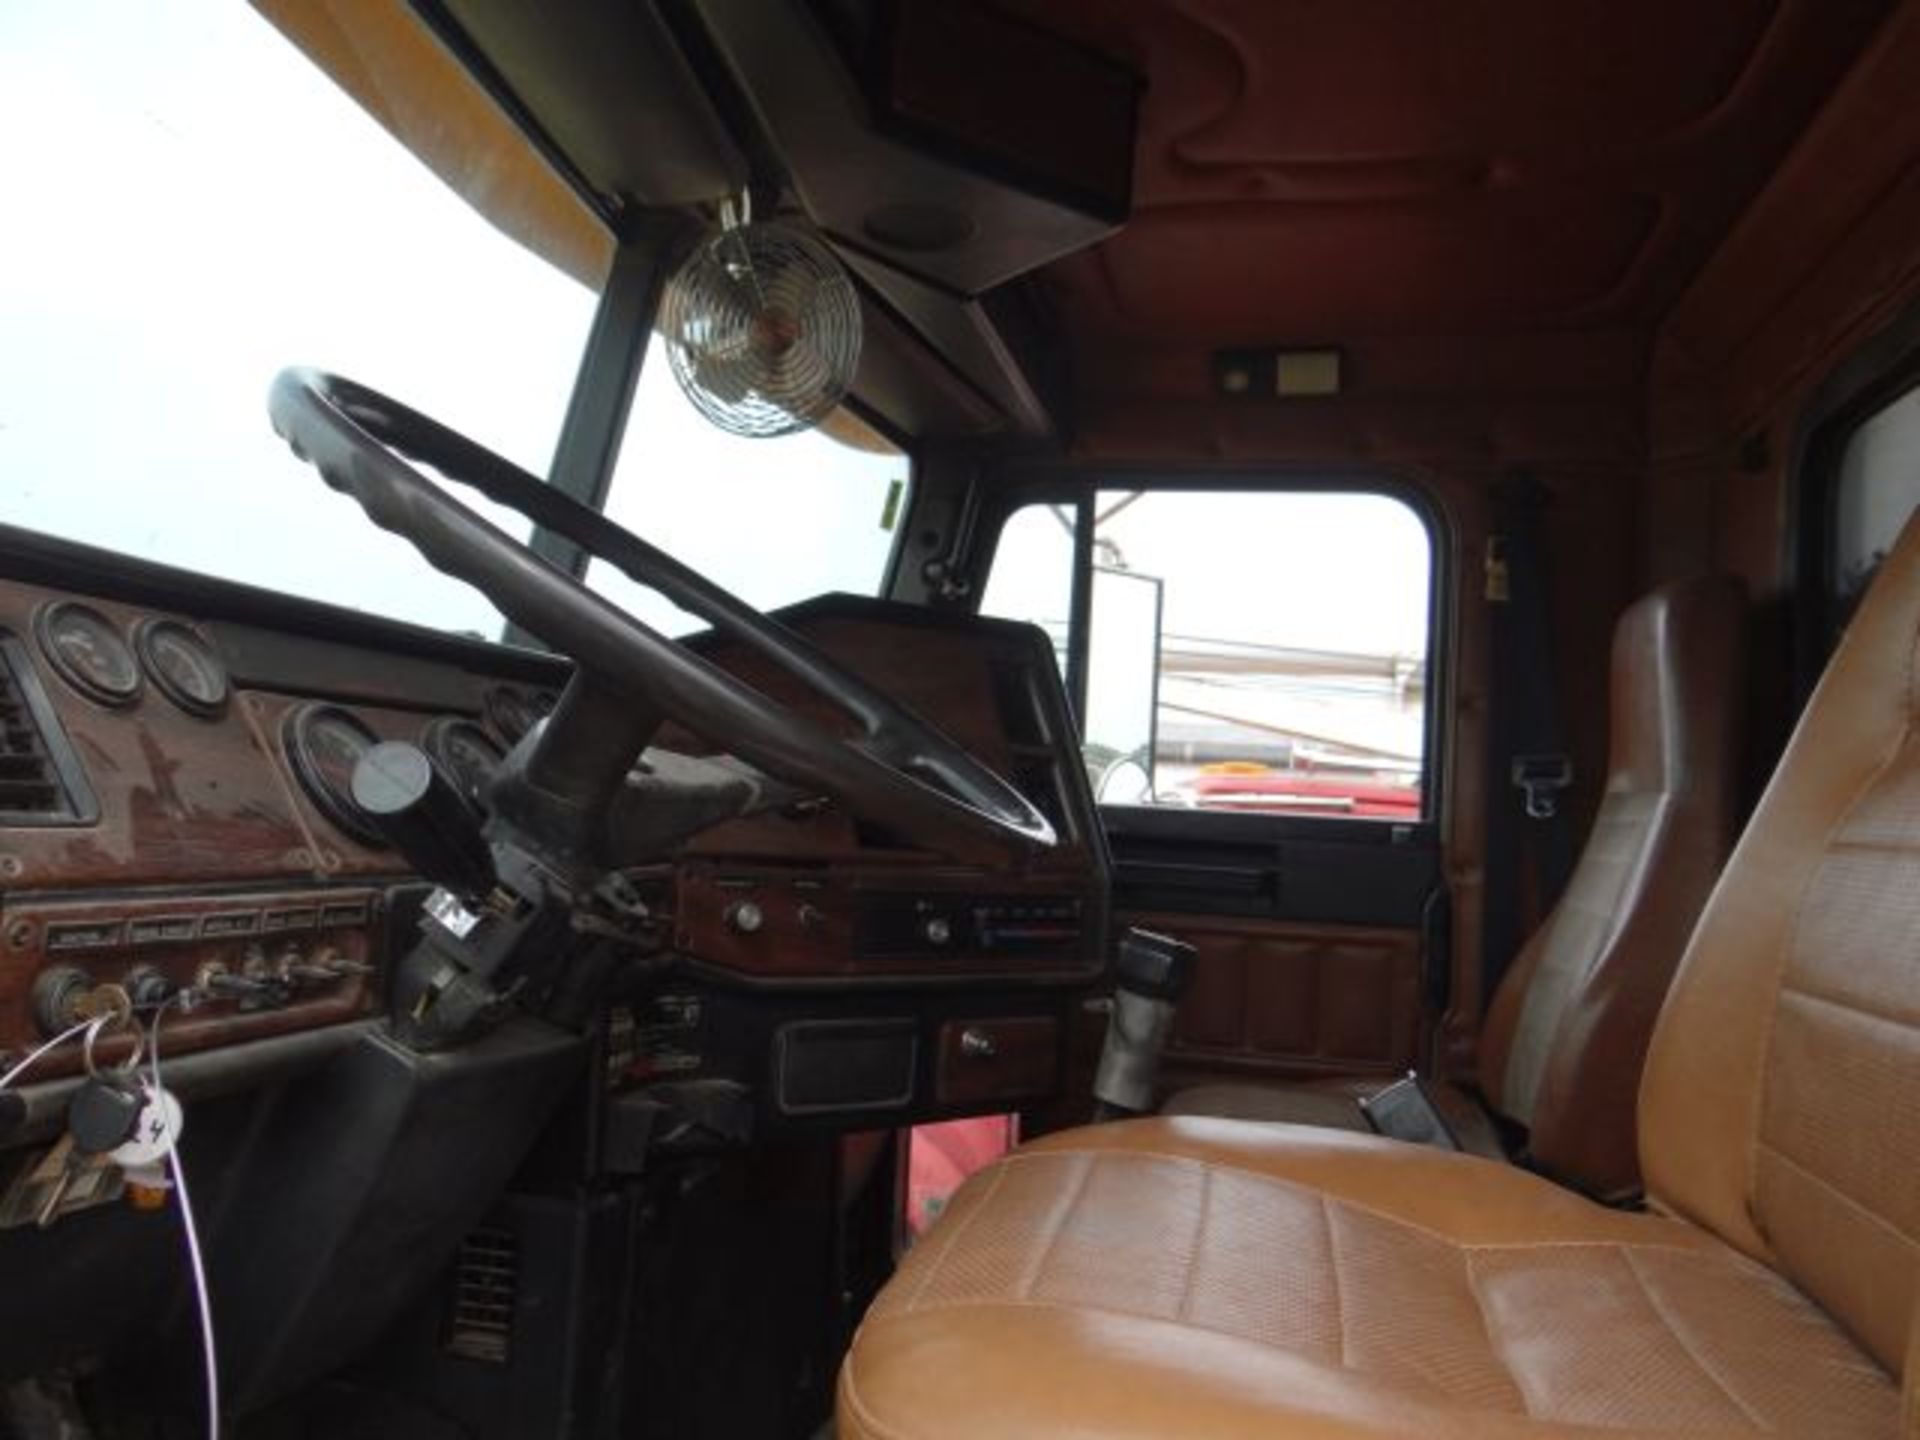 1993 Freightliner Dump Truck 400,000+ miles, 9sp, Elec Roll Tarp, Air Operated Tailgate, Title in - Image 4 of 5